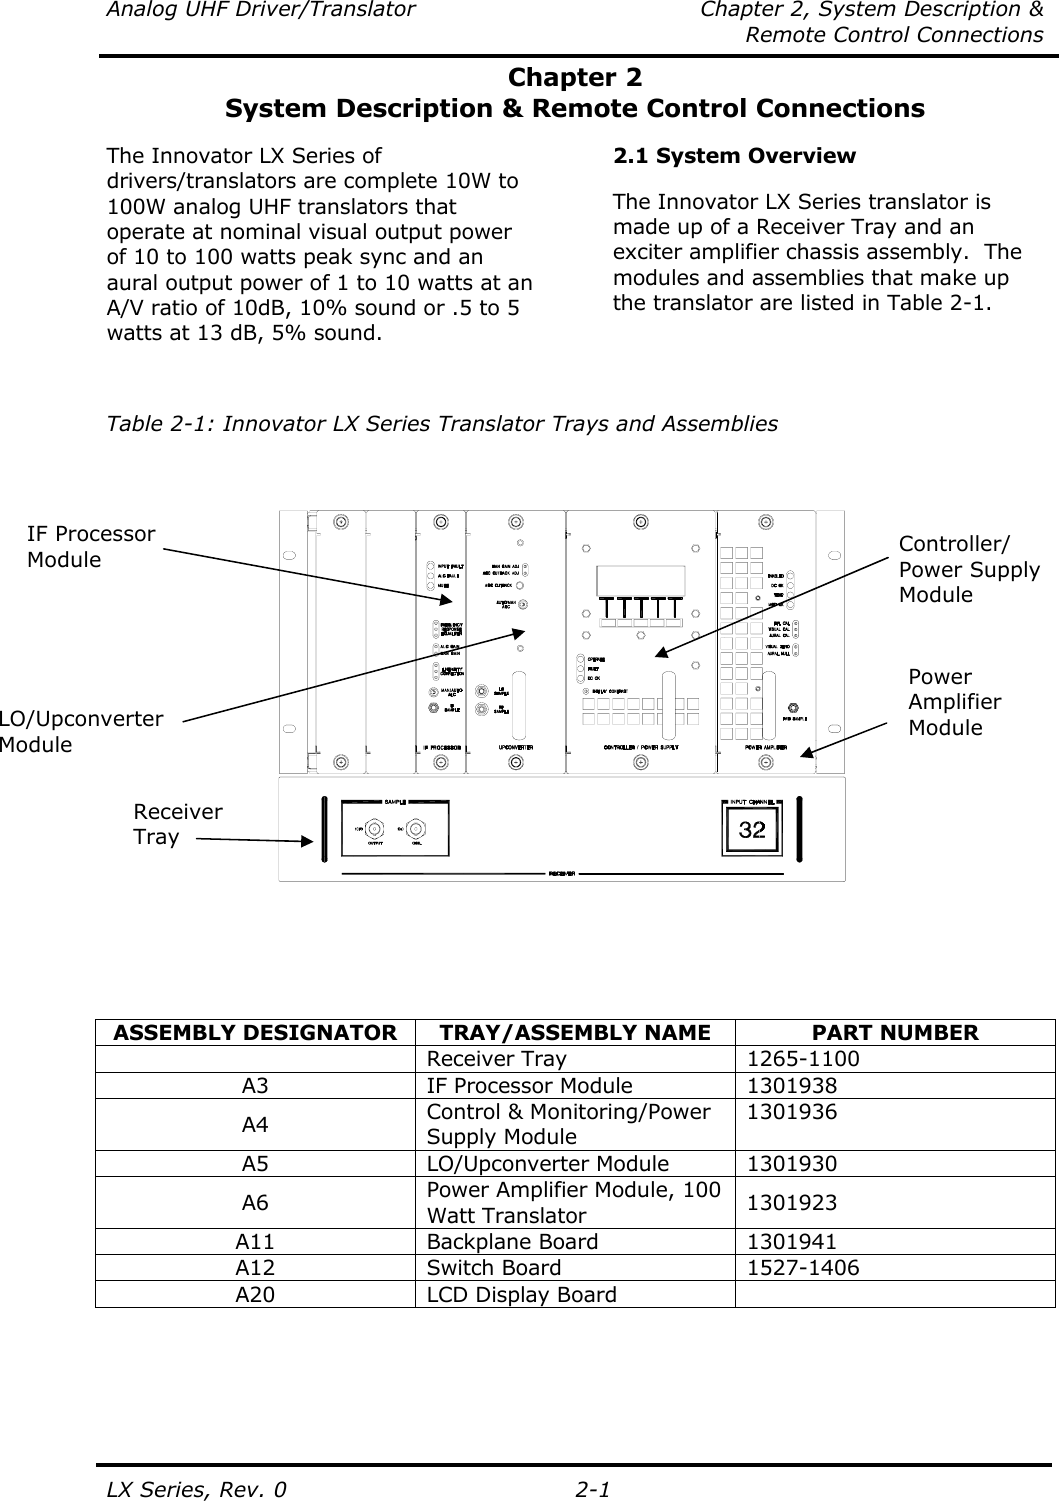 Analog UHF Driver/Translator  Chapter 2, System Description &amp;   Remote Control Connections LX Series, Rev. 0  2-1 IF Processor Module LO/Upconverter Module Chapter 2 System Description &amp; Remote Control Connections  The Innovator LX Series of drivers/translators are complete 10W to 100W analog UHF translators that operate at nominal visual output power of 10 to 100 watts peak sync and an aural output power of 1 to 10 watts at an A/V ratio of 10dB, 10% sound or .5 to 5 watts at 13 dB, 5% sound.   2.1 System Overview  The Innovator LX Series translator is made up of a Receiver Tray and an exciter amplifier chassis assembly.  The modules and assemblies that make up the translator are listed in Table 2-1.   Table 2-1: Innovator LX Series Translator Trays and Assemblies                  ASSEMBLY DESIGNATOR  TRAY/ASSEMBLY NAME  PART NUMBER  Receiver Tray  1265-1100 A3  IF Processor Module  1301938 A4  Control &amp; Monitoring/Power Supply Module 1301936 A5 LO/Upconverter Module 1301930 A6  Power Amplifier Module, 100 Watt Translator  1301923 A11 Backplane Board 1301941 A12 Switch Board  1527-1406 A20  LCD Display Board          Receiver Tray Controller/ Power Supply Module Power Amplifier Module 